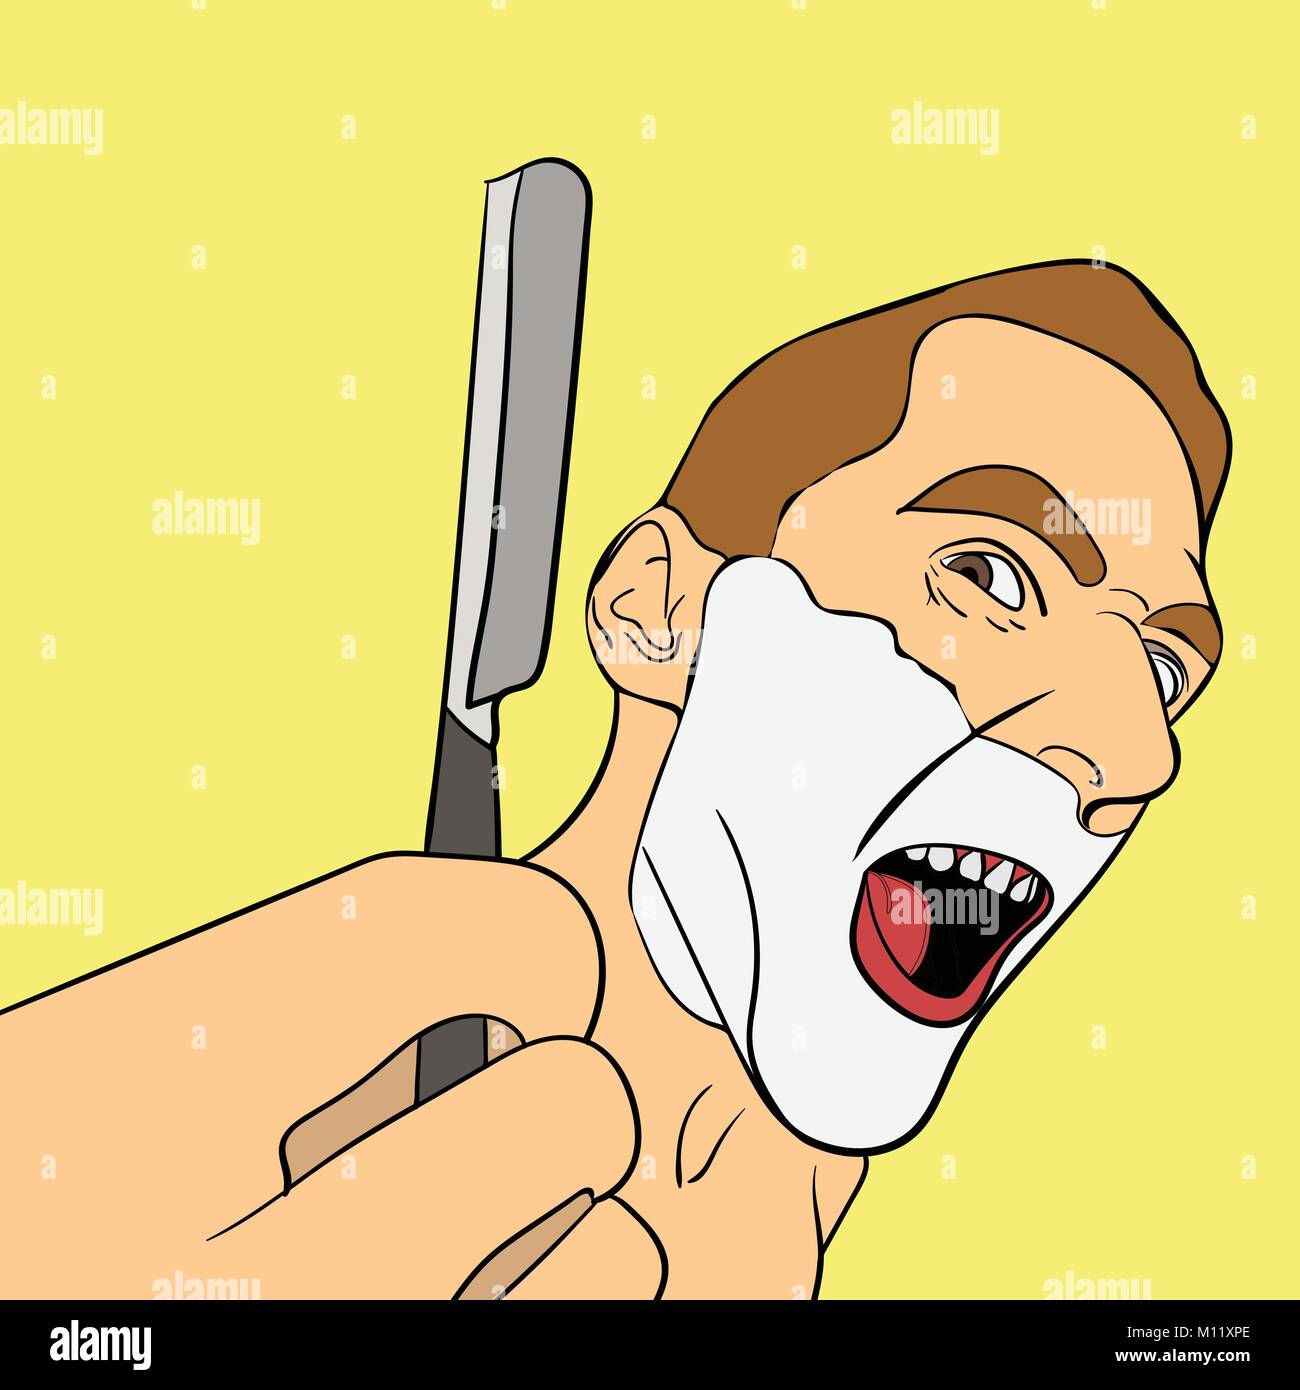 Man is holding a straight razor. Mad man. On the face of shaving cream. Vector art in the style of pop art Stock Vector